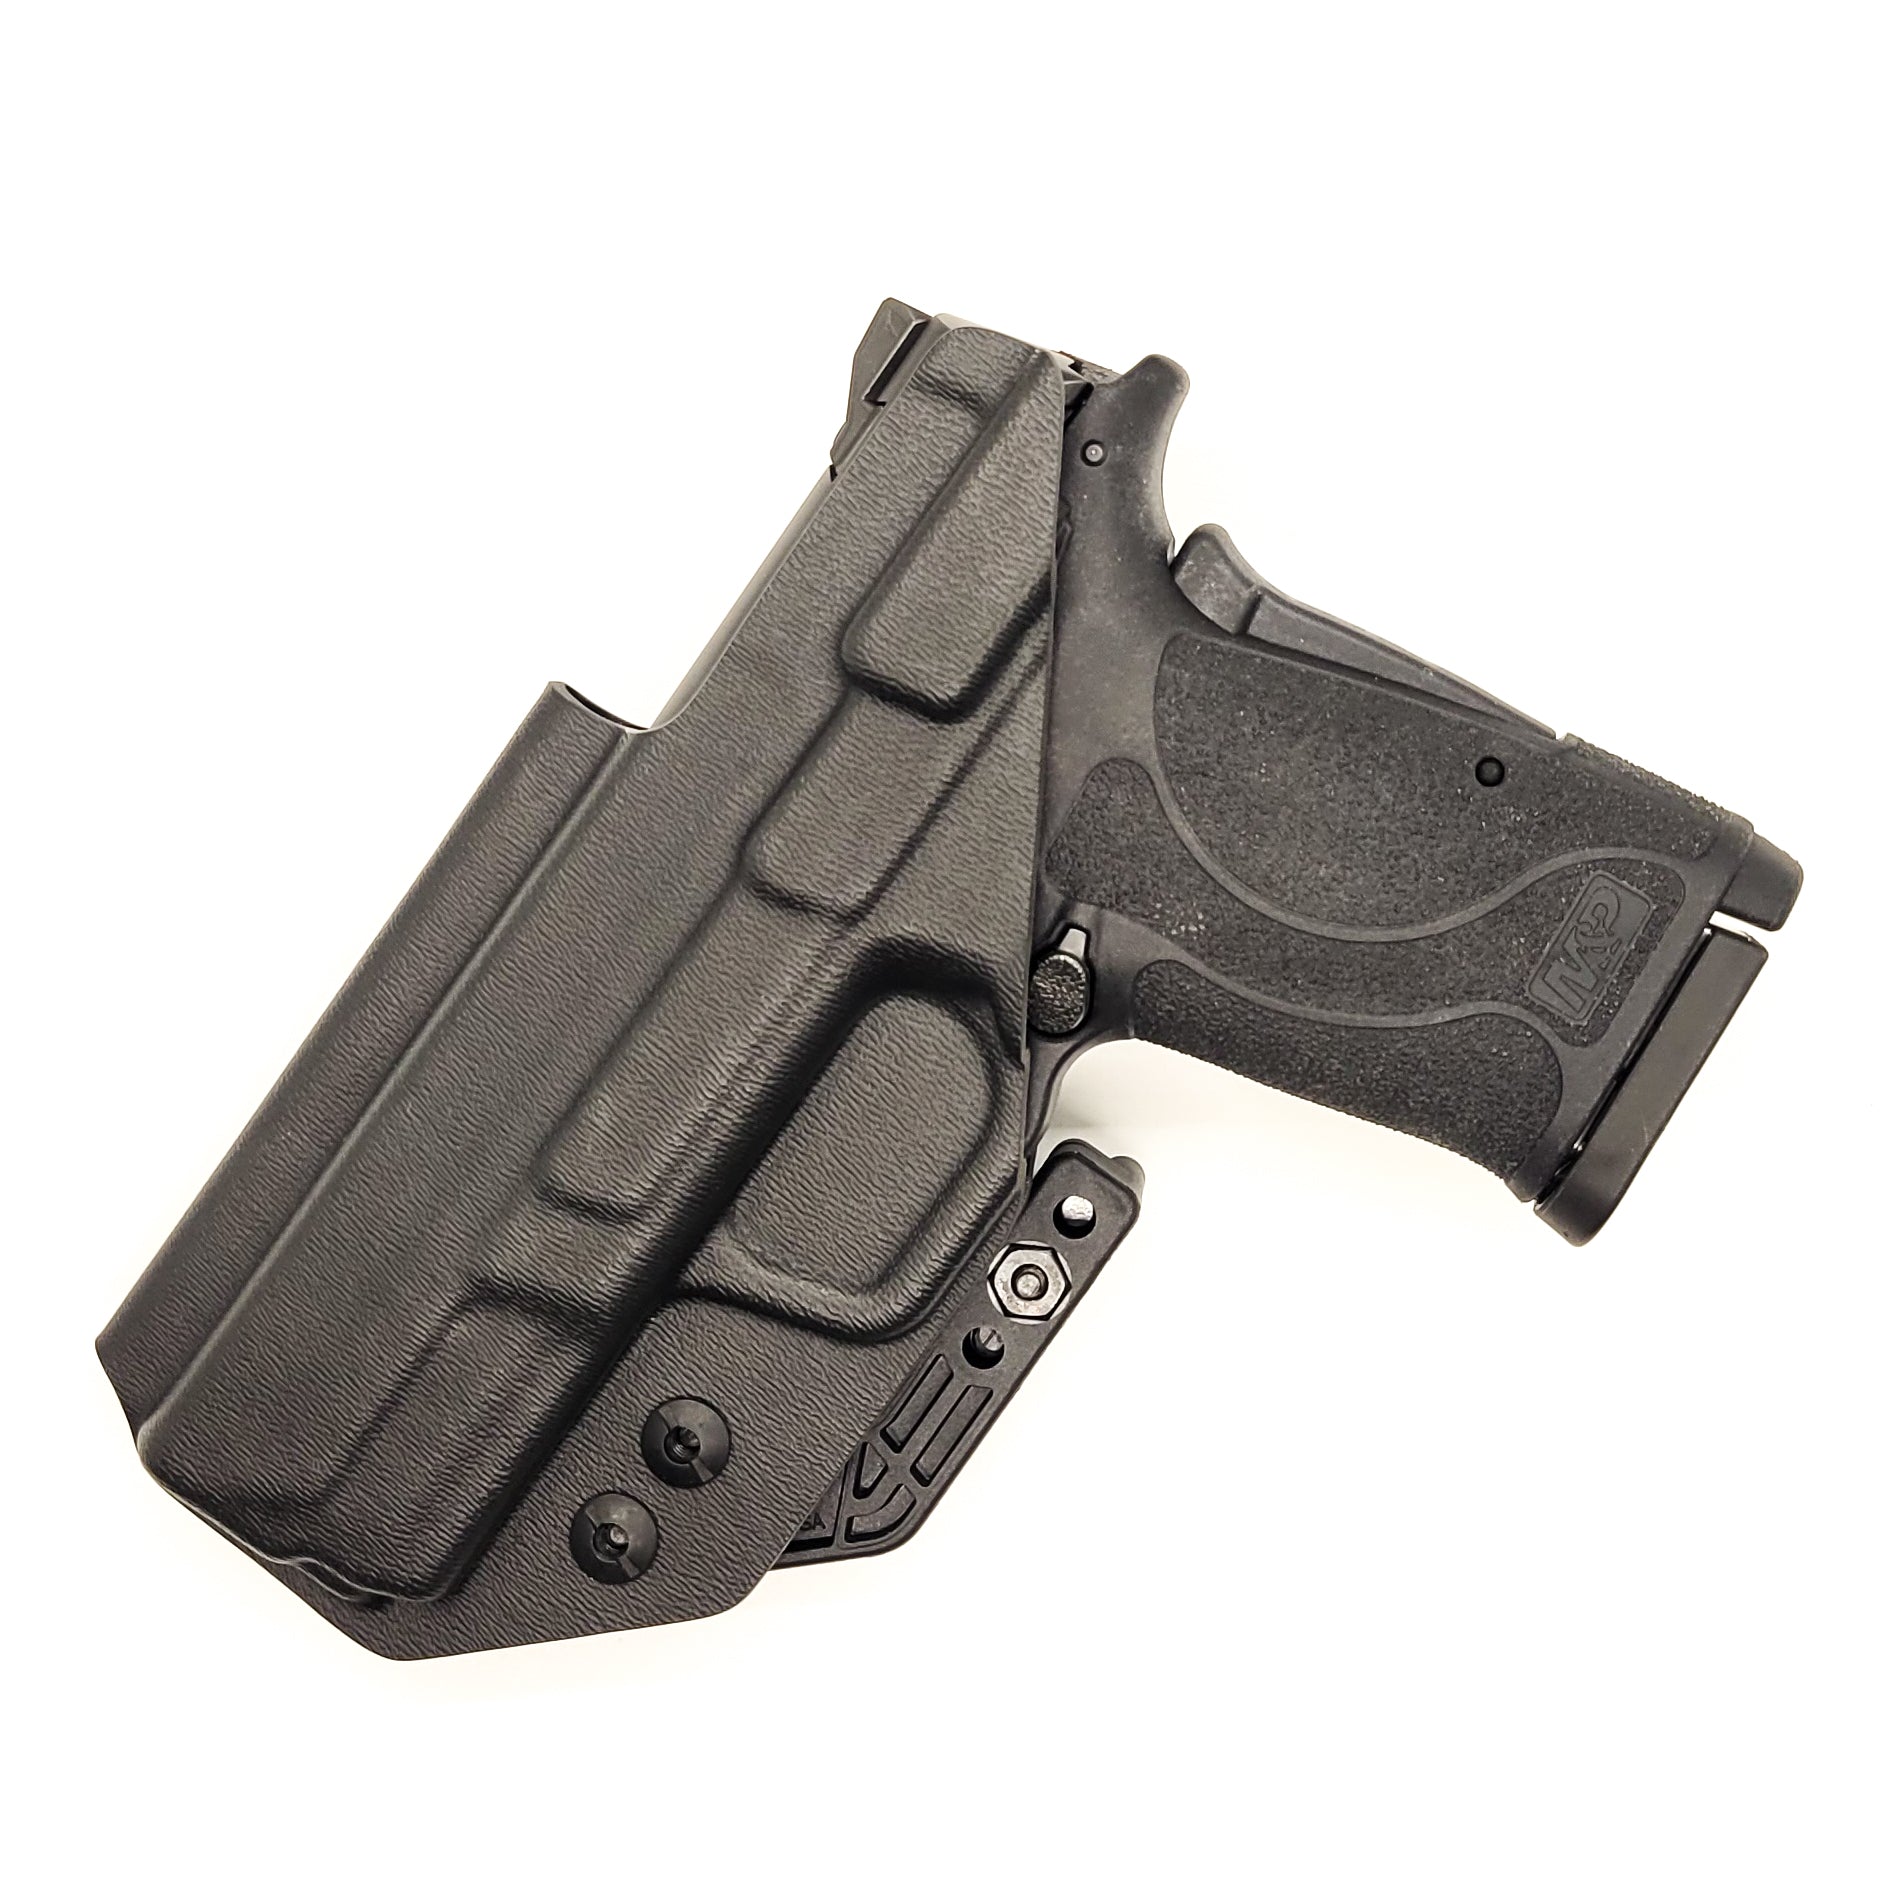 S&W Shield EZ 9 Zero Carry Elite In Waistband Holster for